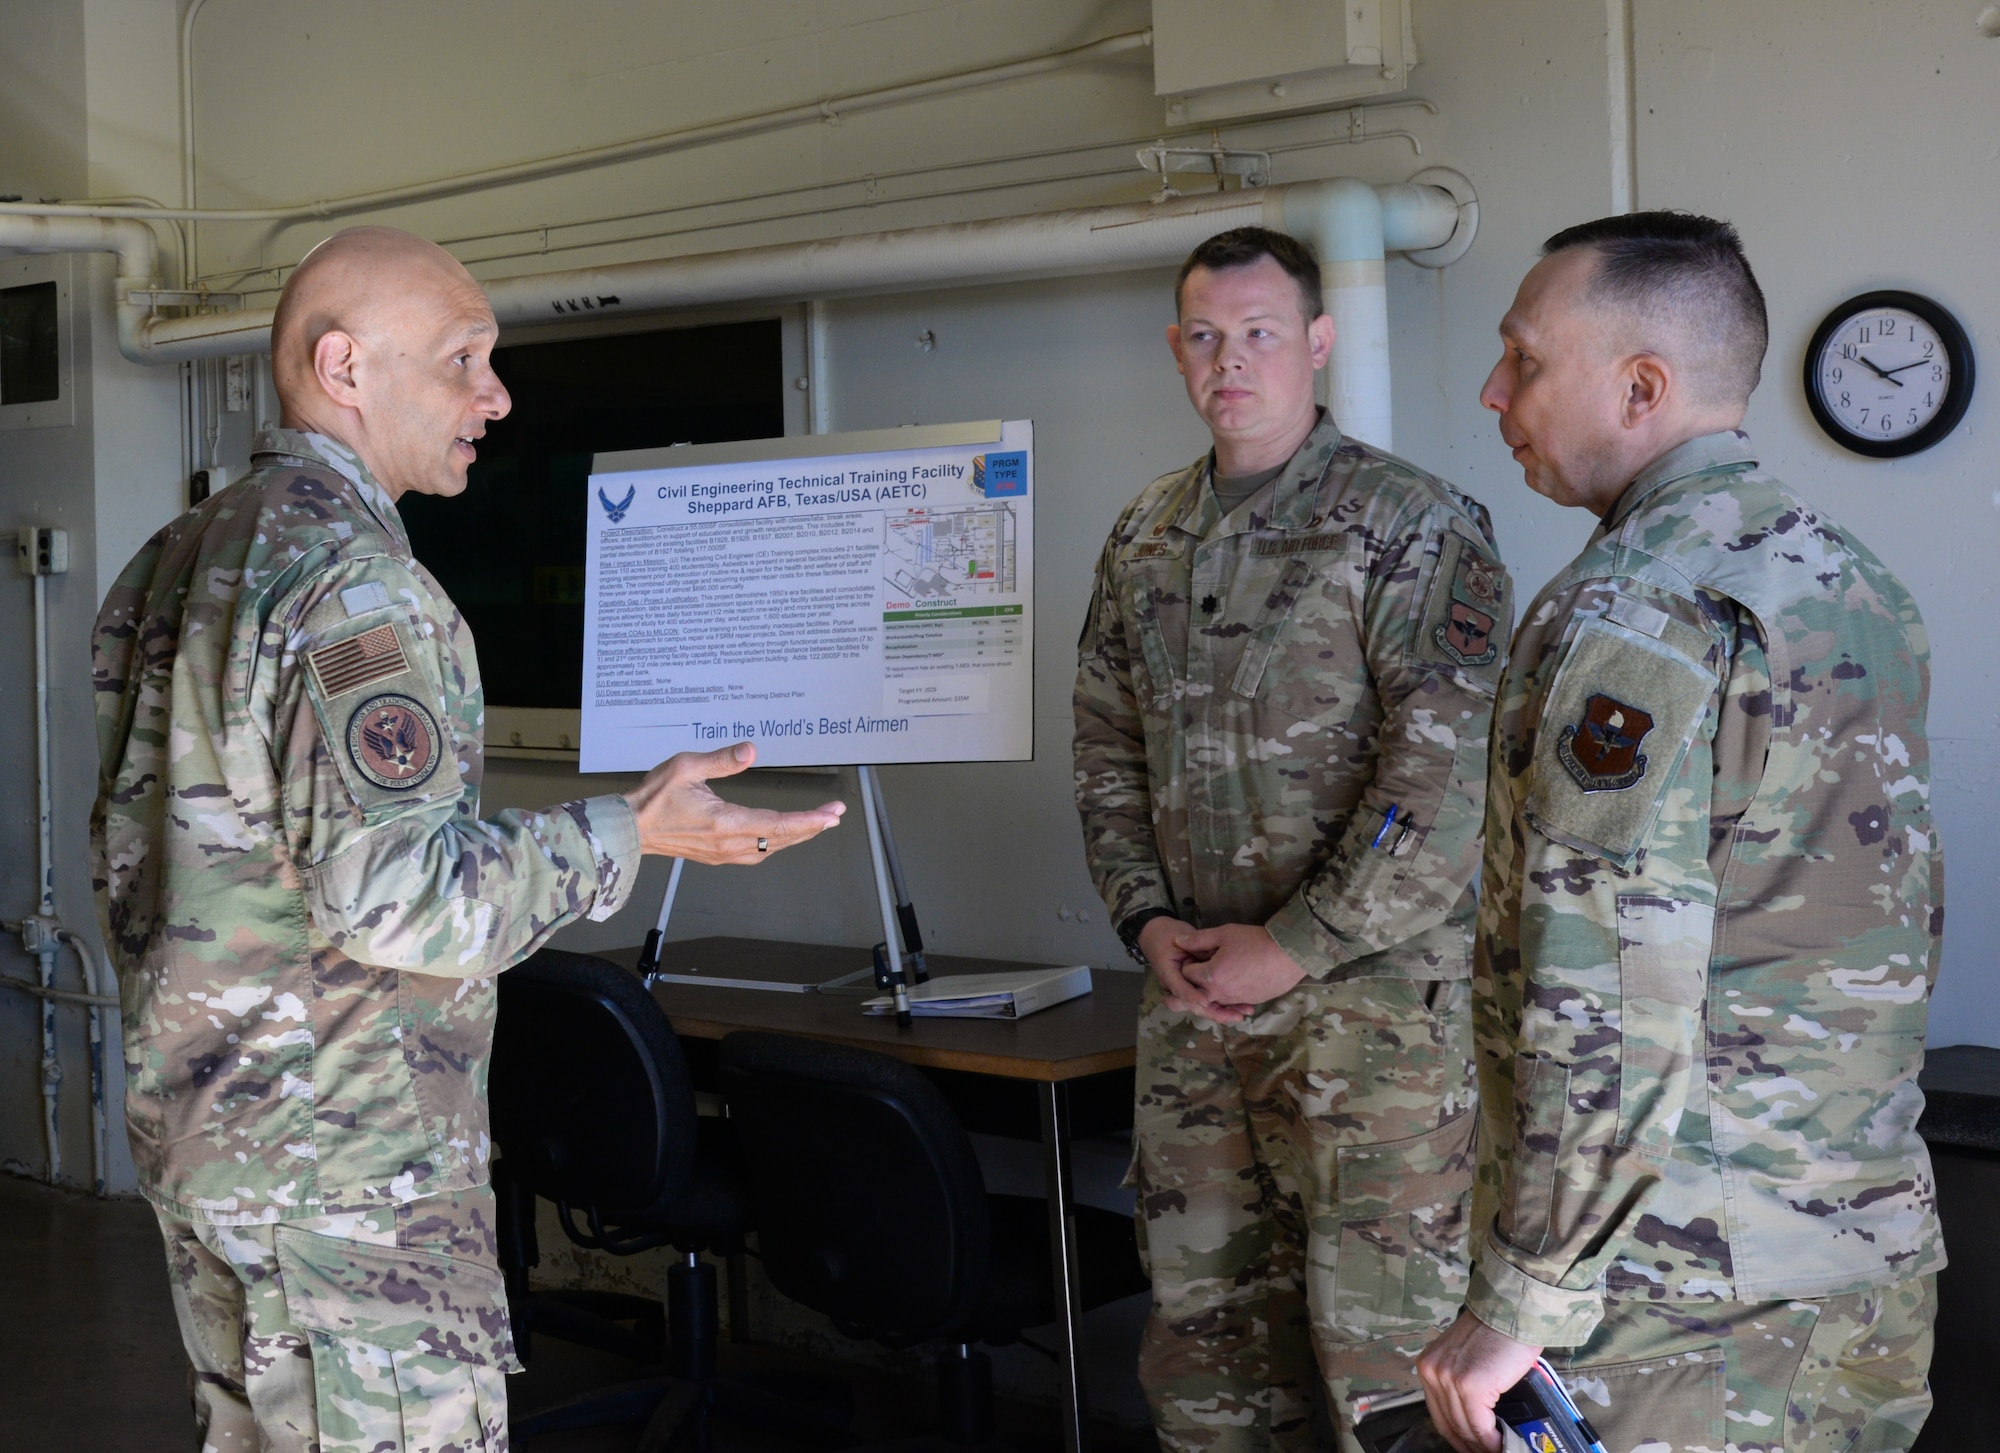 The AETC command team was at Sheppard AFB for a closer look at how members of the 82nd Training Wing are developing Airmen and investing in a ready and resilient force.